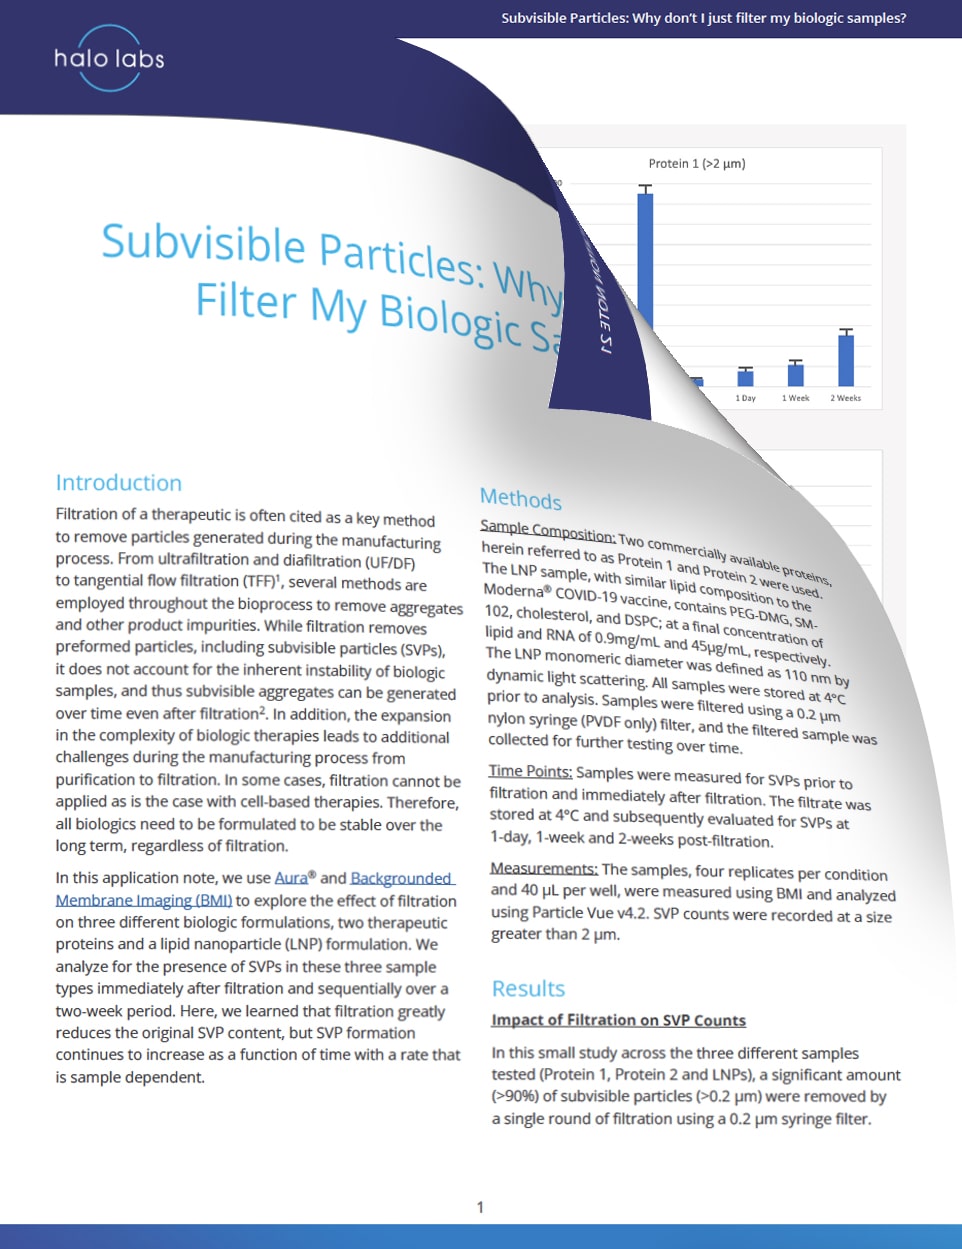 Thumbnail preview of App Note 21 looking at subvisible particles after filtering biologic products